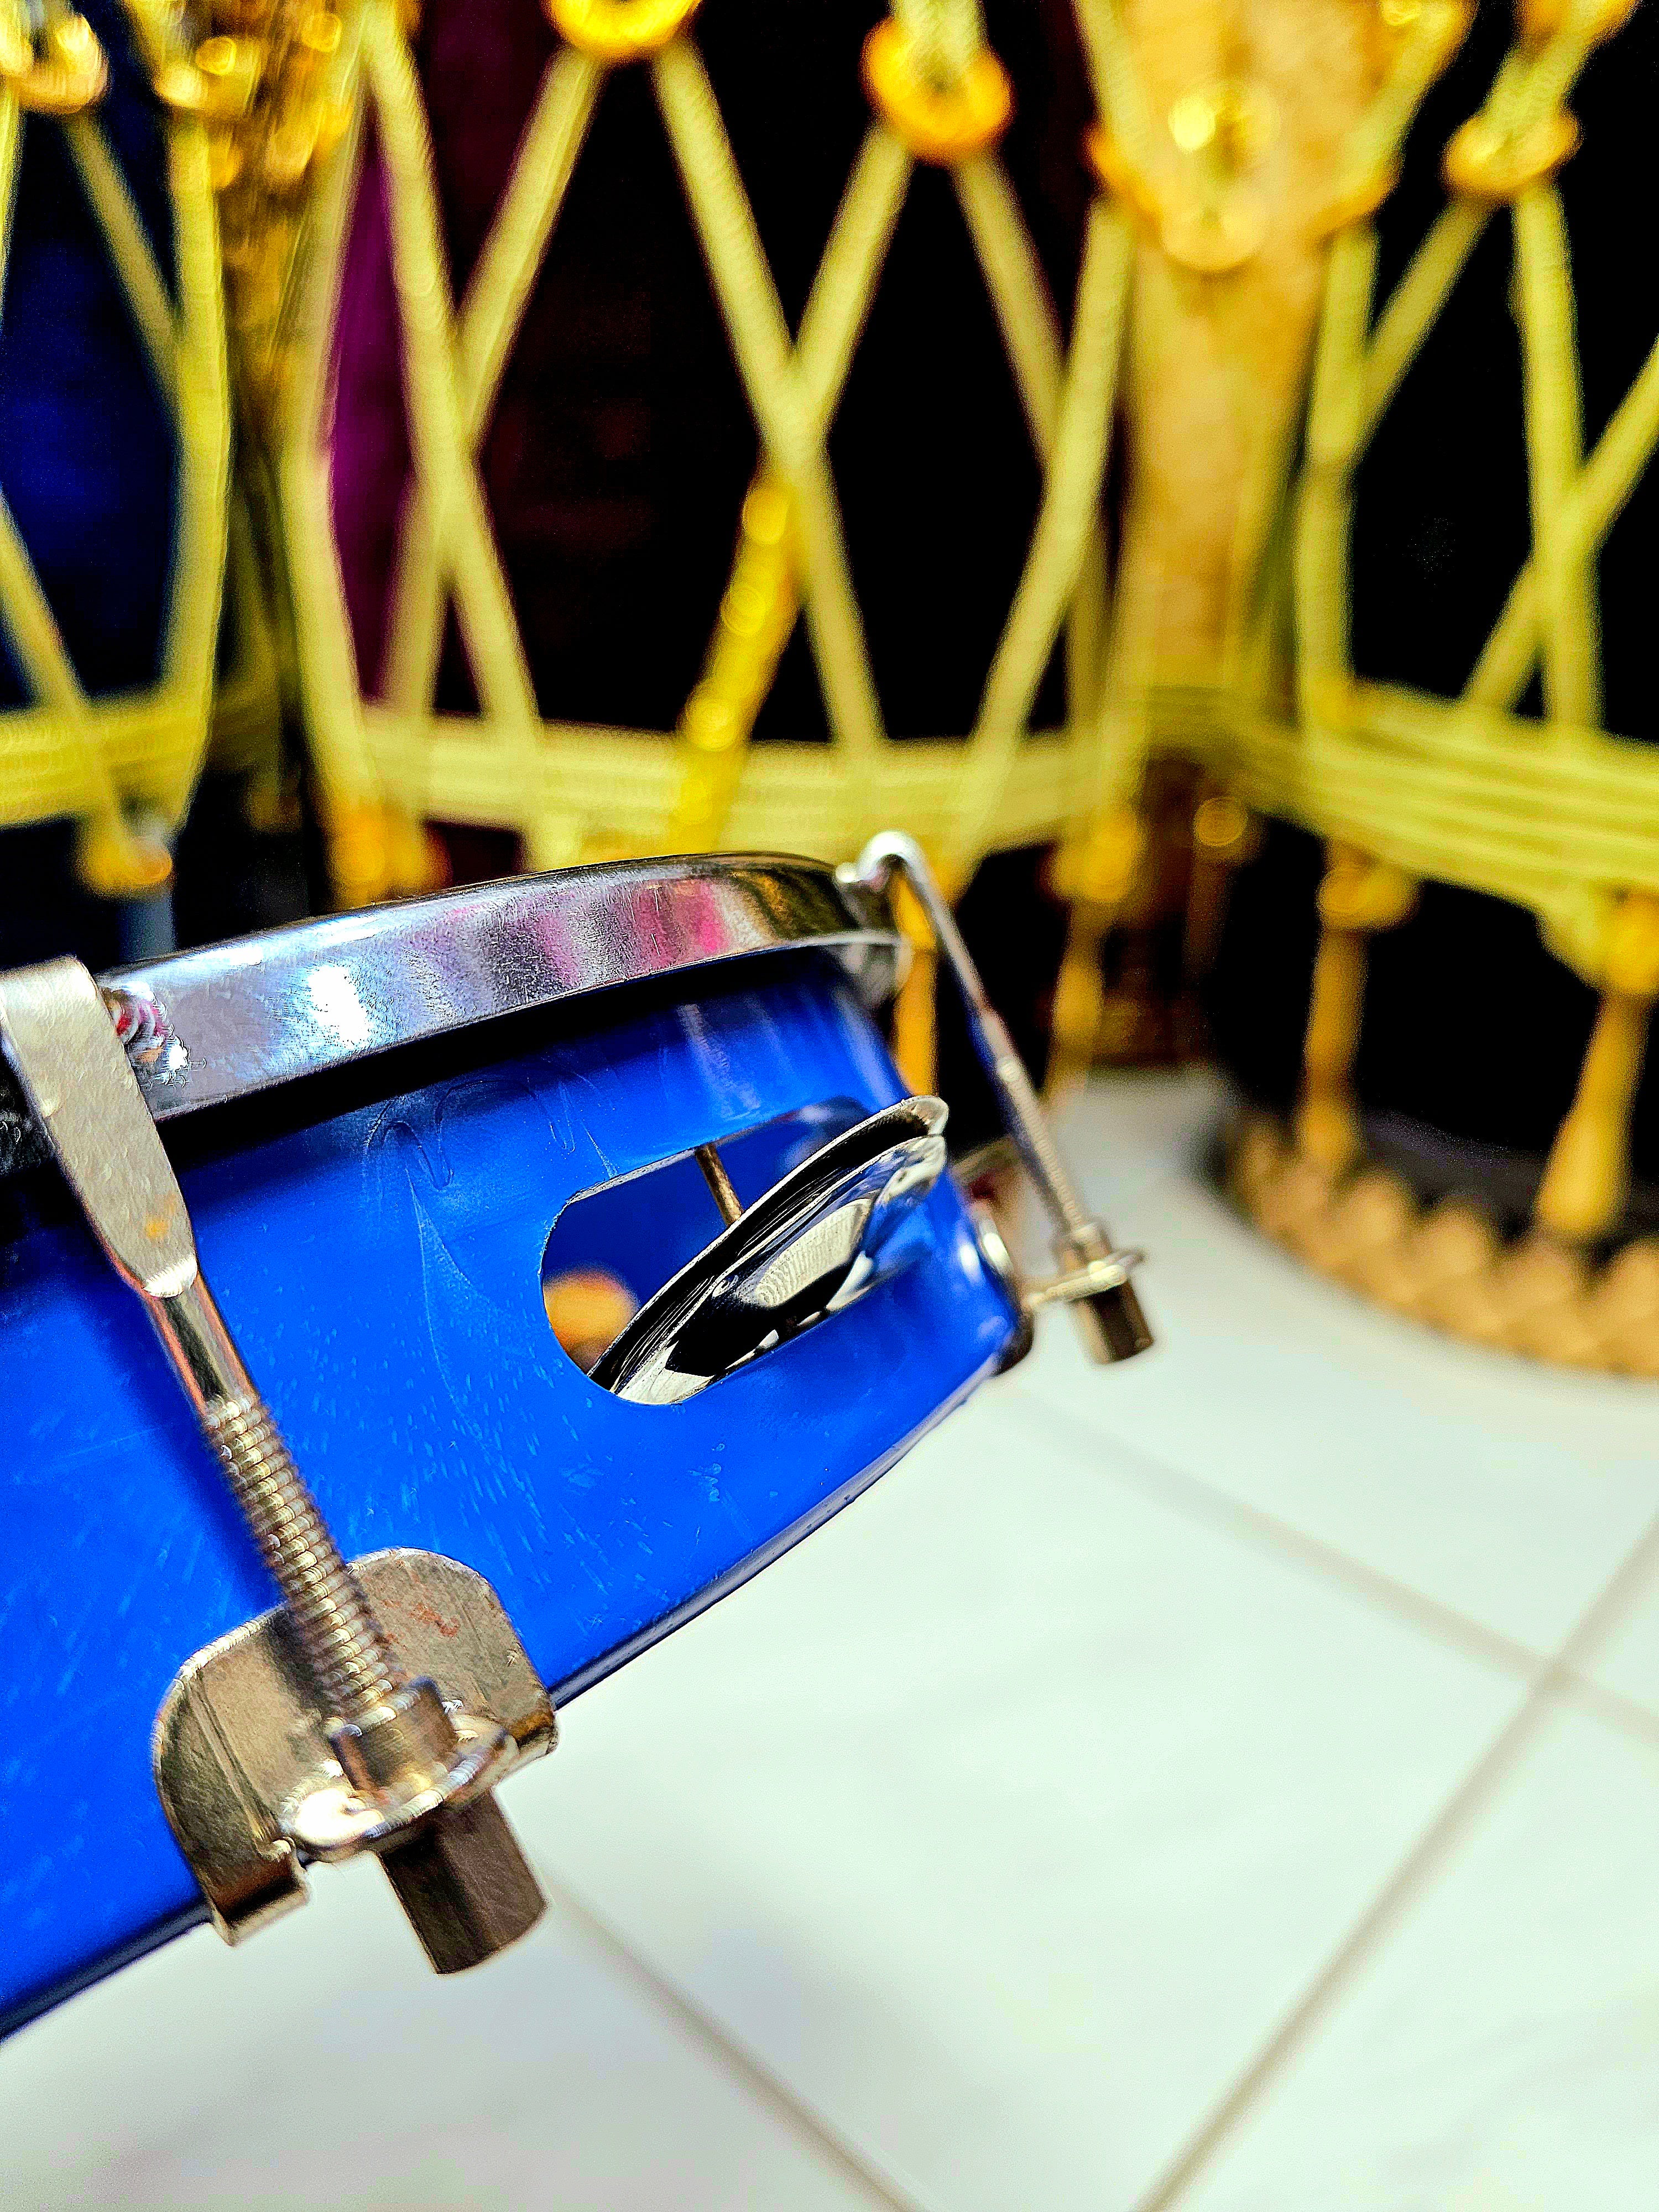 Azure Beat: Blue 8" Tunable Tambourine - Rhythmic Waves in Your Hands